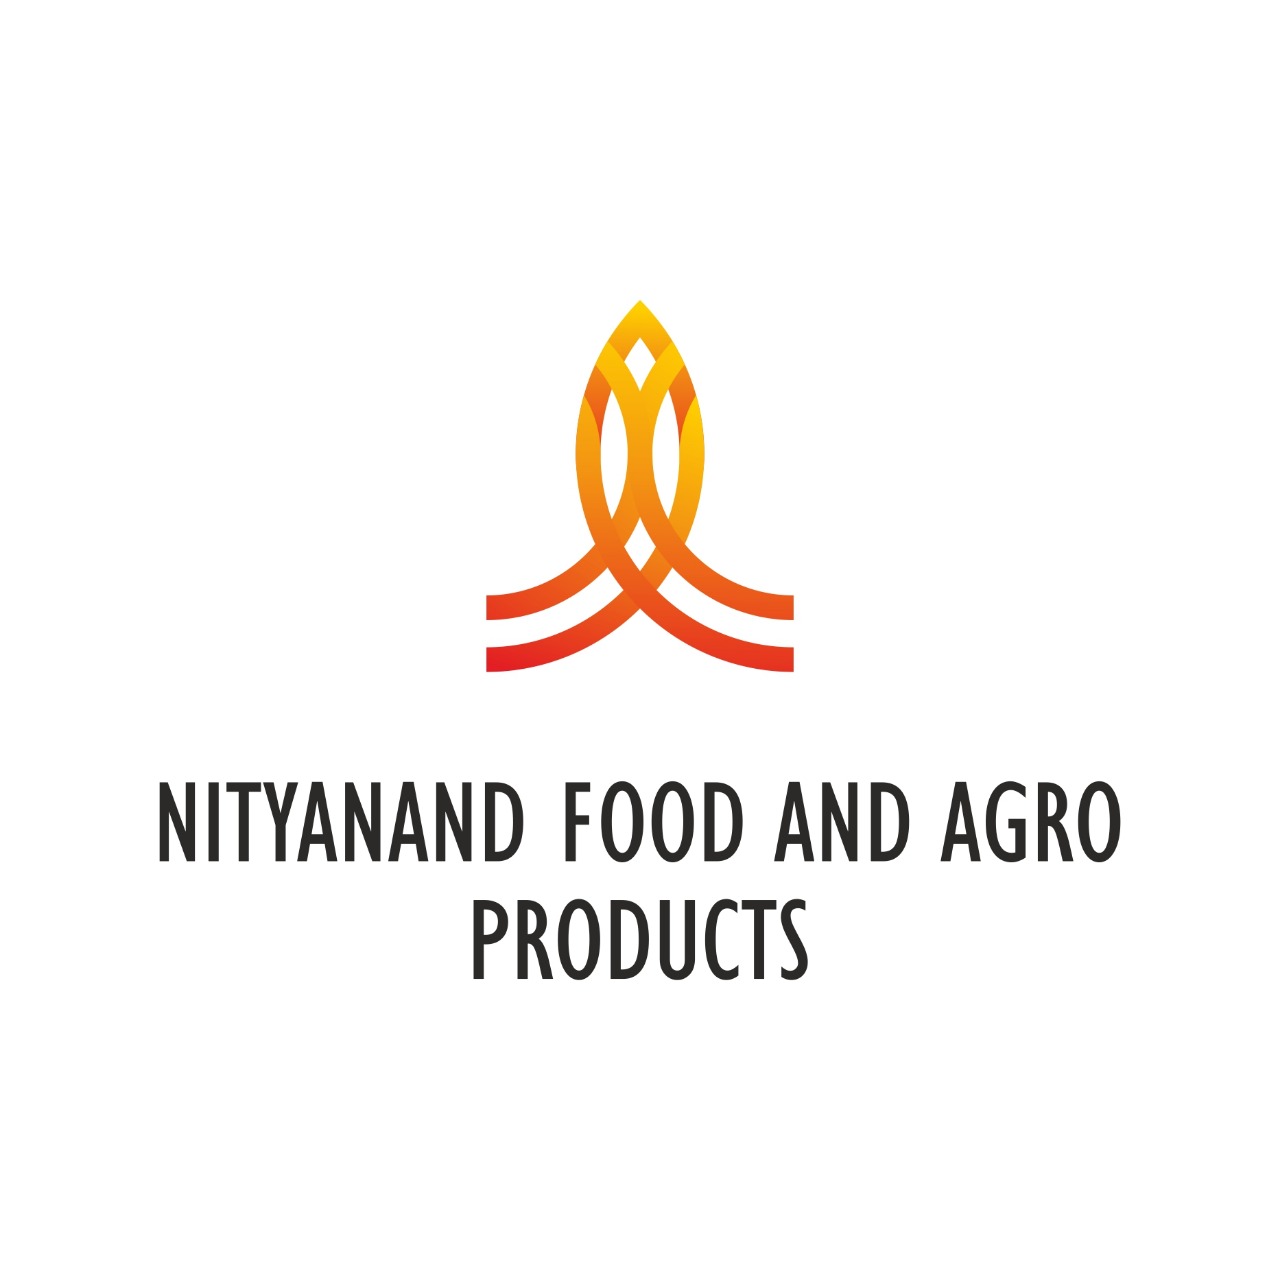 Nityanand Foods and Agro Products